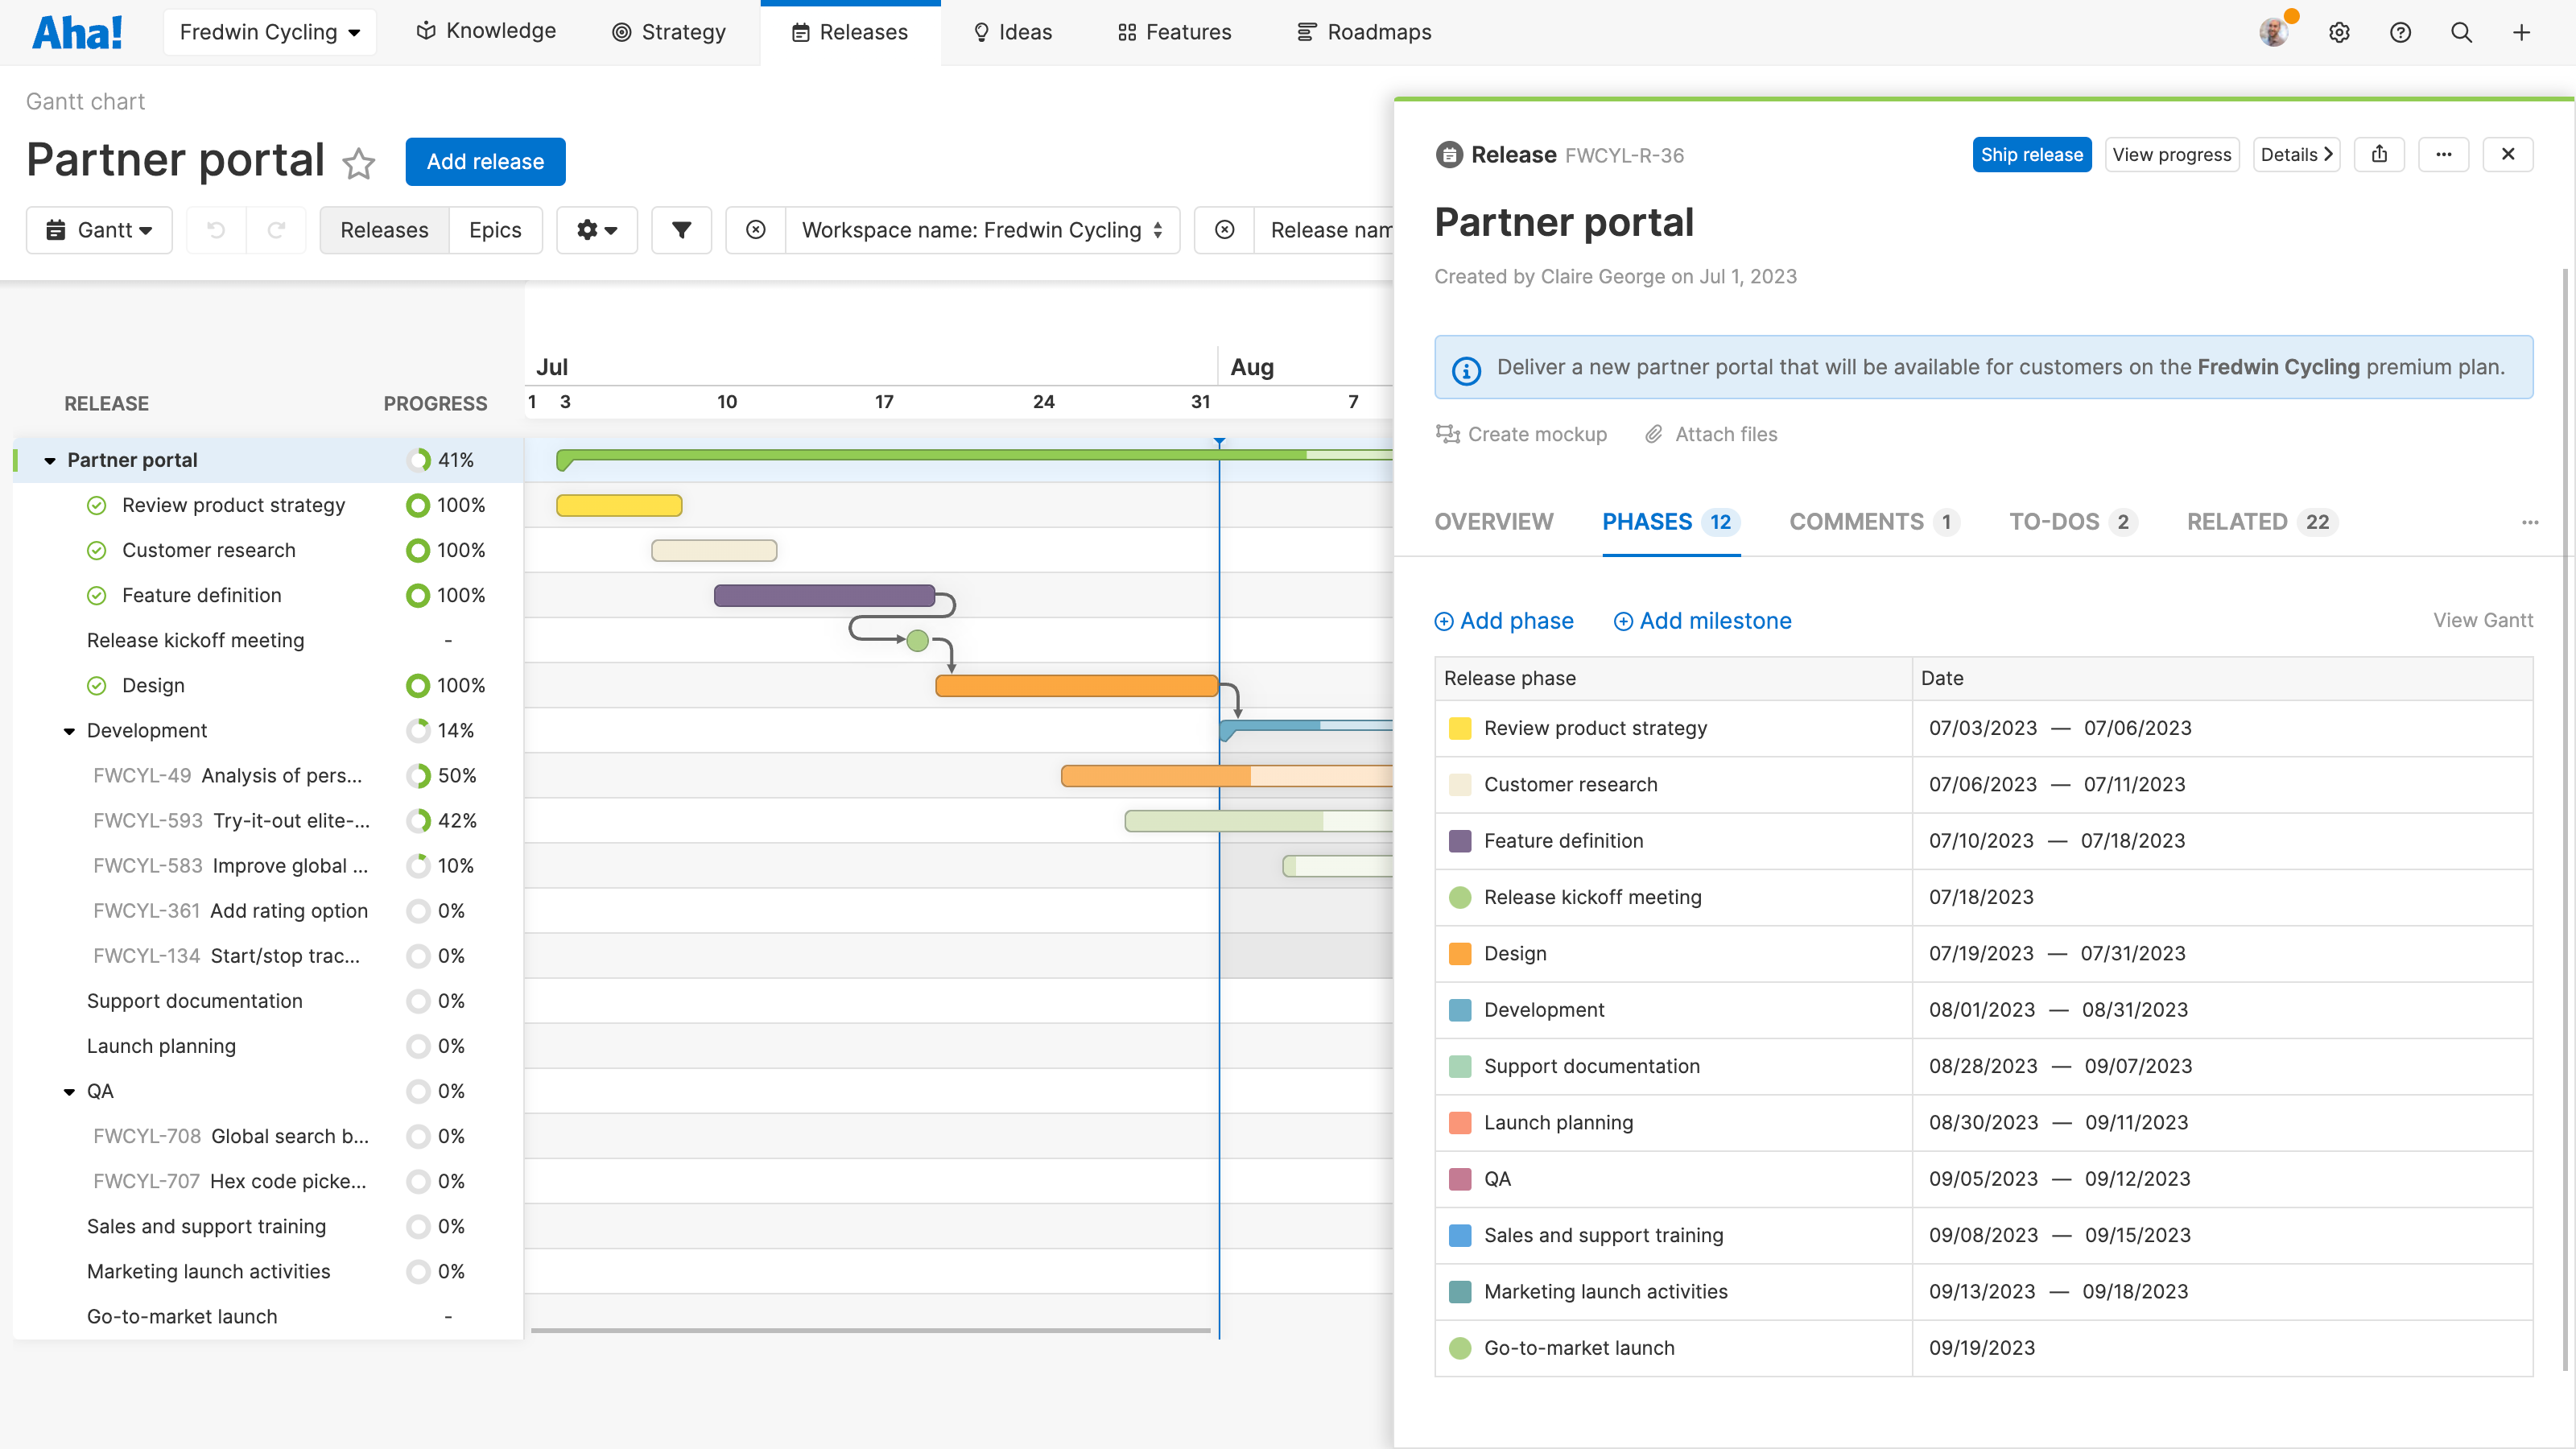 Manage releases with phases and milestones